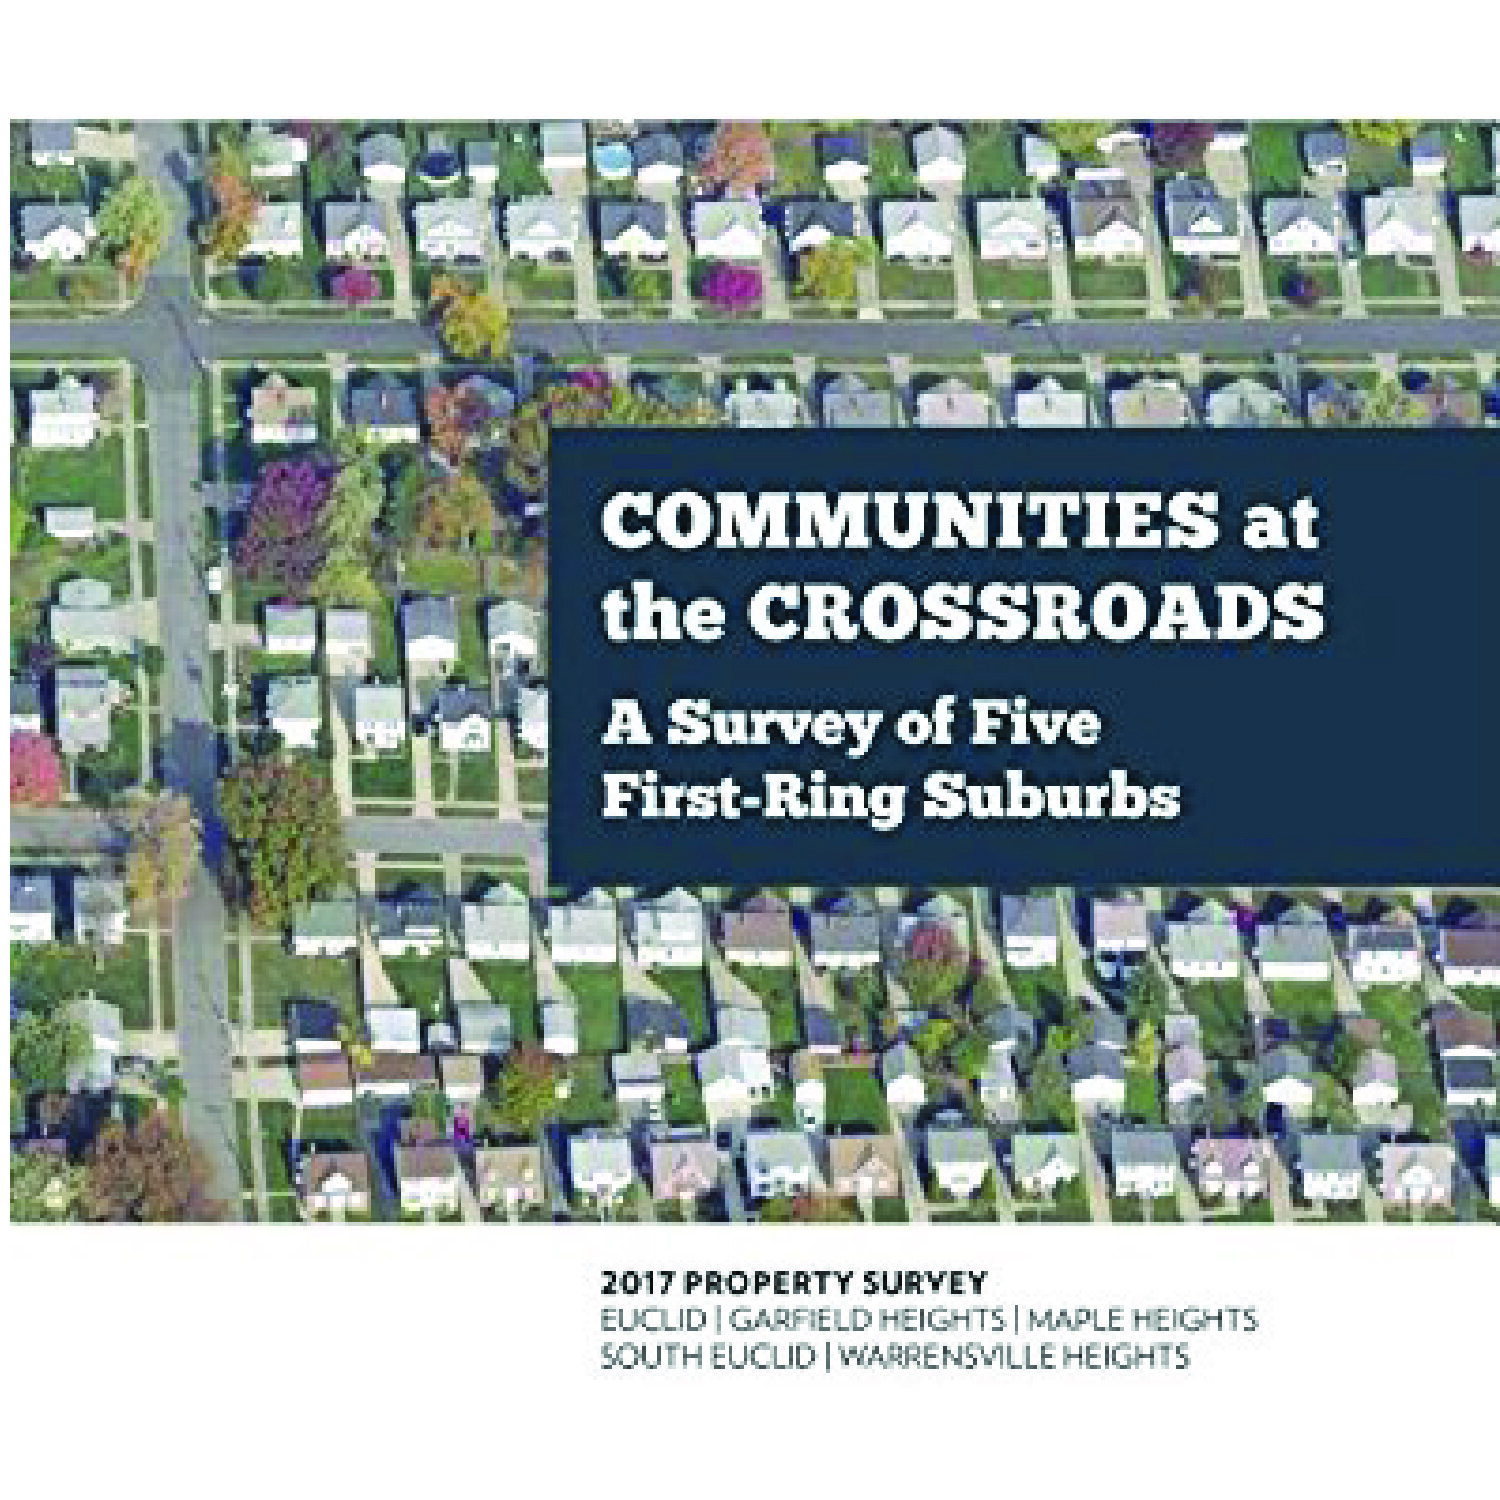 Communities at the Crossroads: A Survey of Five First-Ring Suburbs